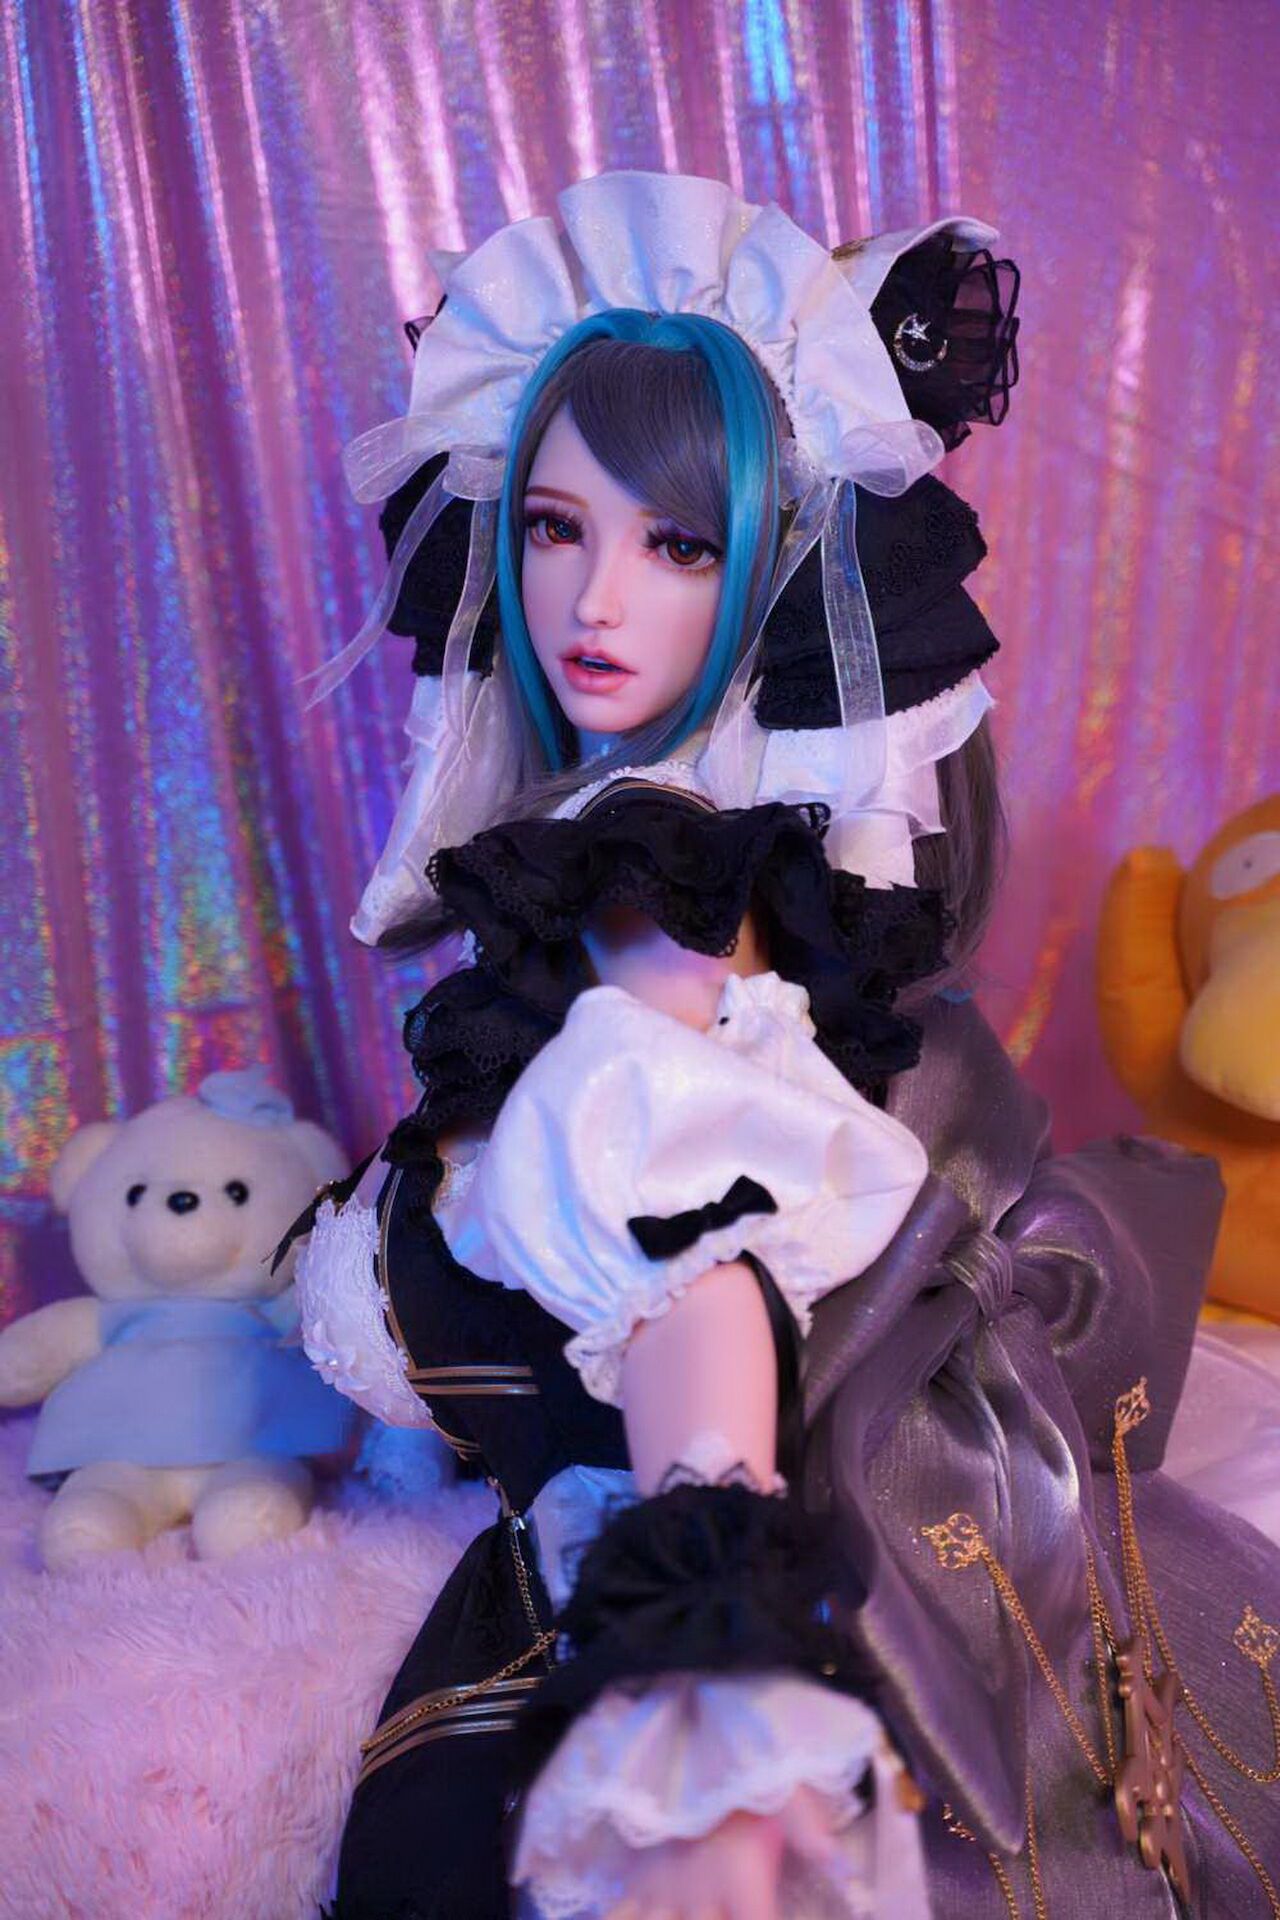 Meow meow meow, your personal maid Cheshire Meow Cosplay is here !! by Little pickled cucumber @devil_sama8844 30